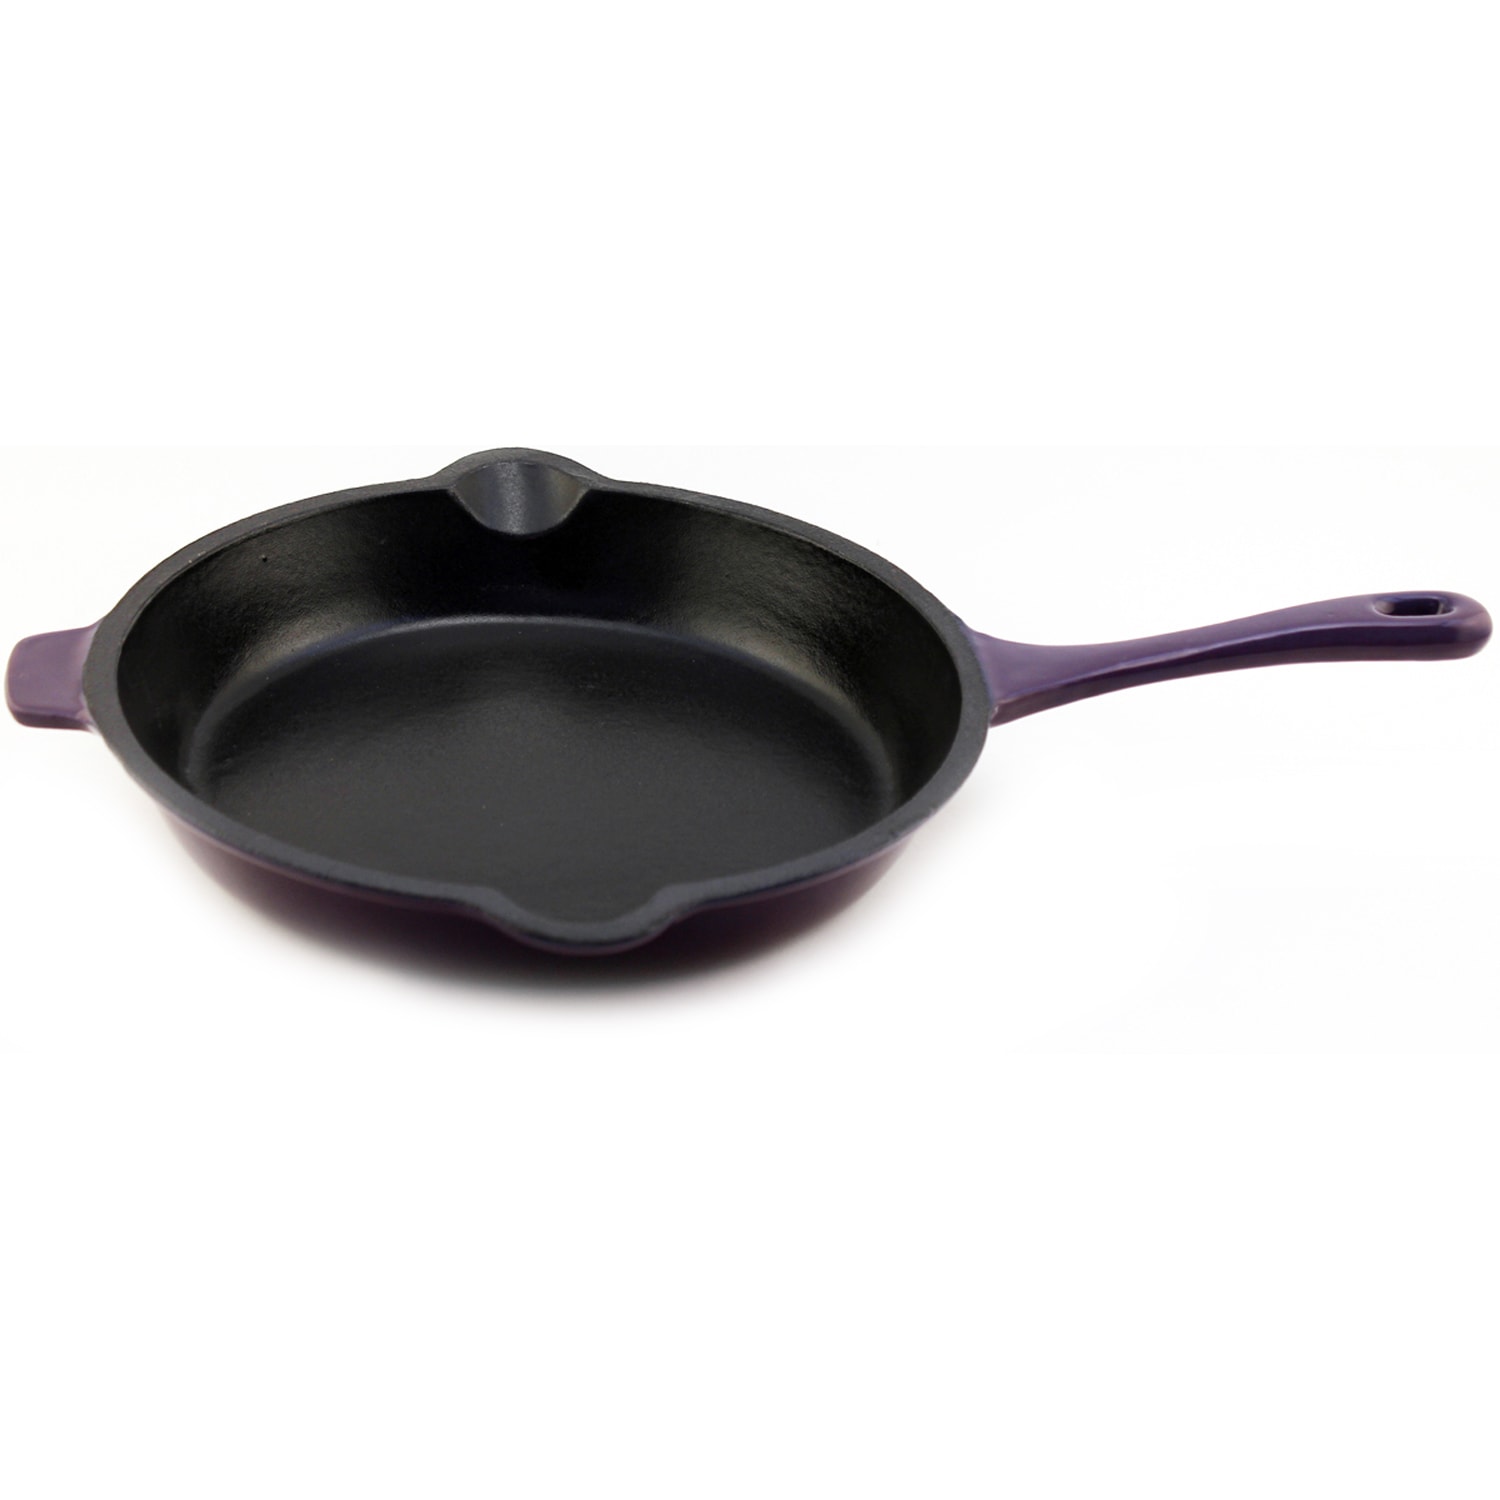 https://ak1.ostkcdn.com/images/products/10594115/Neo-10-inch-Purple-Cast-Iron-Fry-Pan-938293f5-f5cb-4290-b86f-6e3fe2eb74a8.jpg